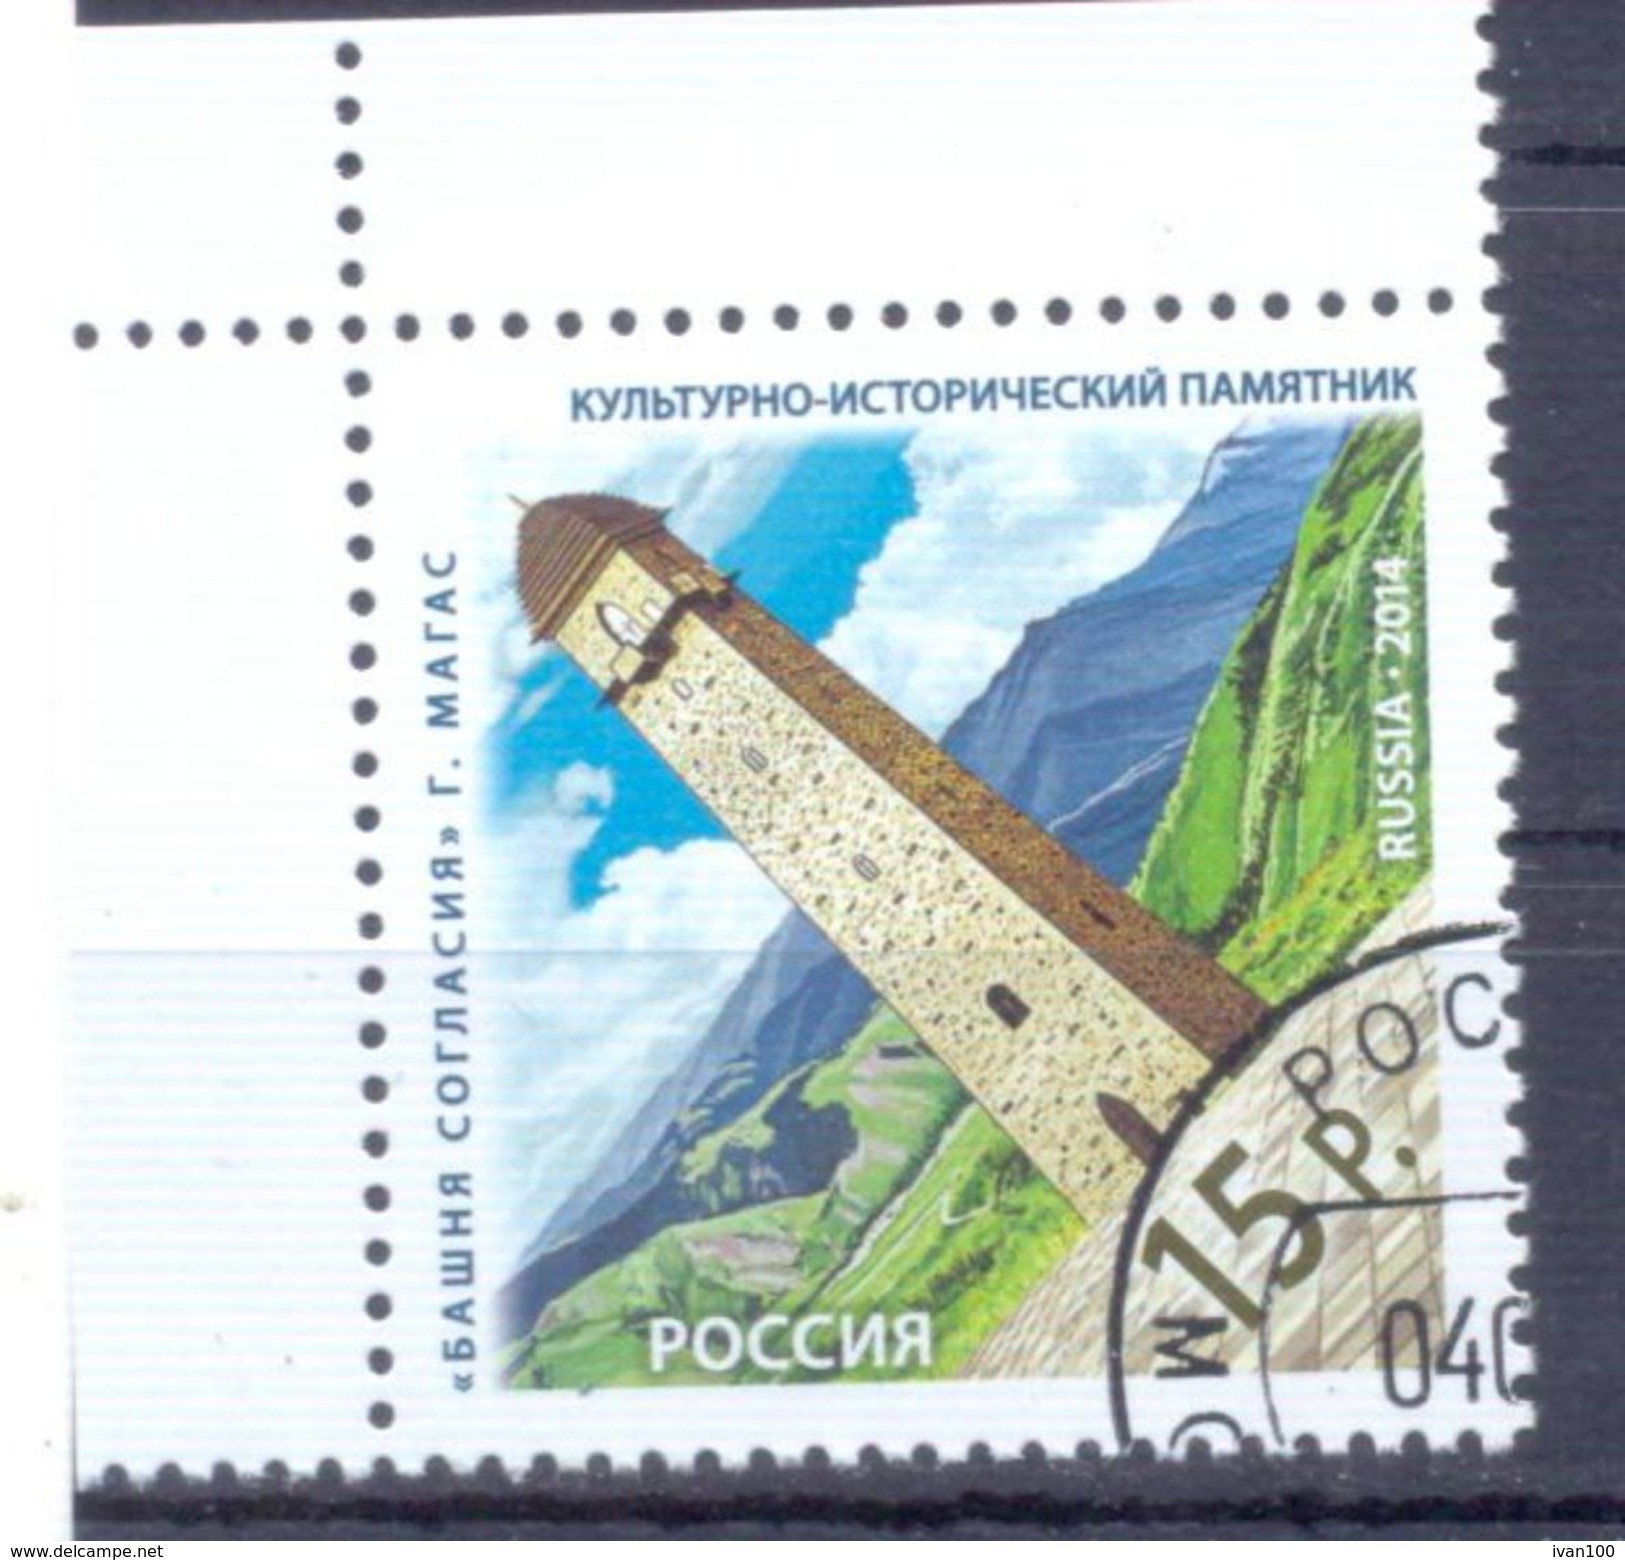 2014. Russia, The Consent Tower, Ingushetia, 1v, Used/CTO - Oblitérés